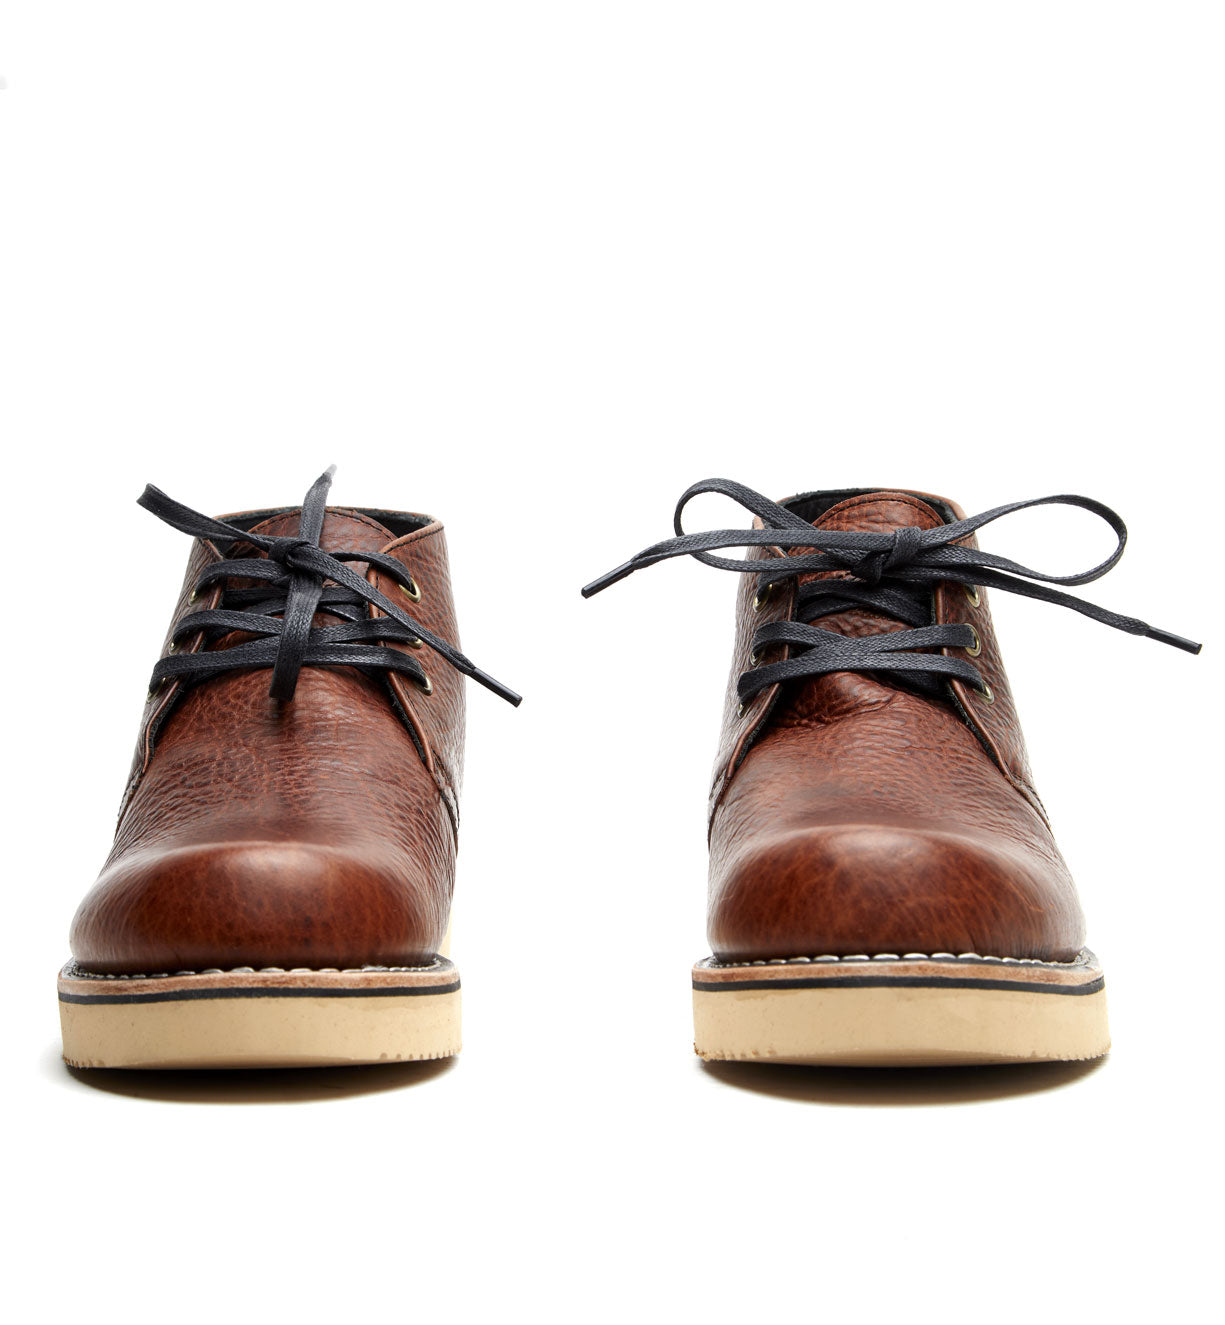 A pair of brown Union Boot shoes with black laces from the Santa Rosa Brand.